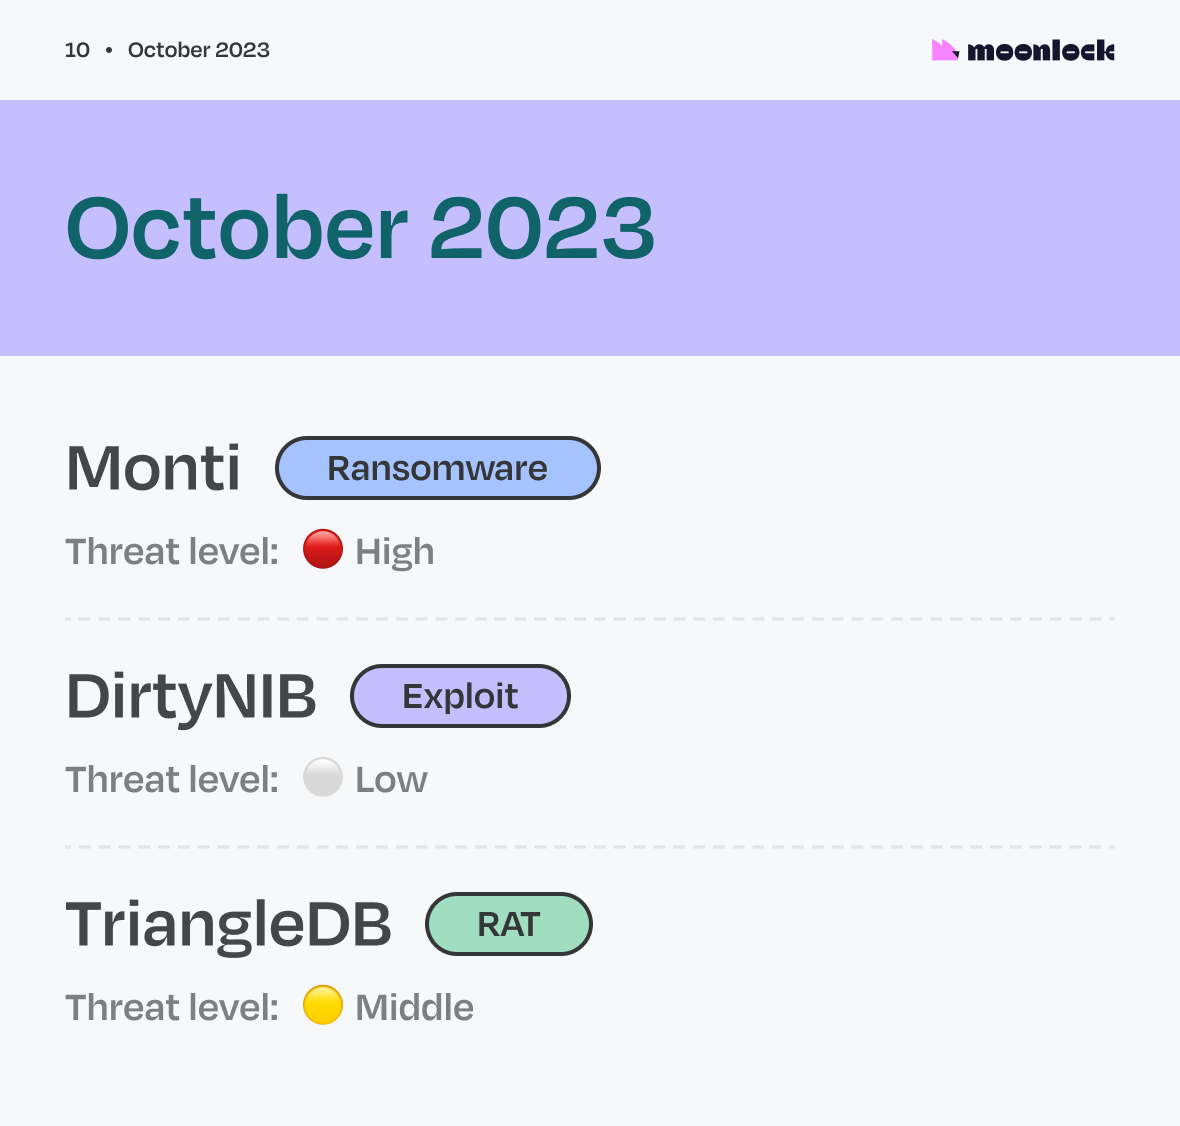 A year in malware: The biggest macOS malware threats in 2023, October image.